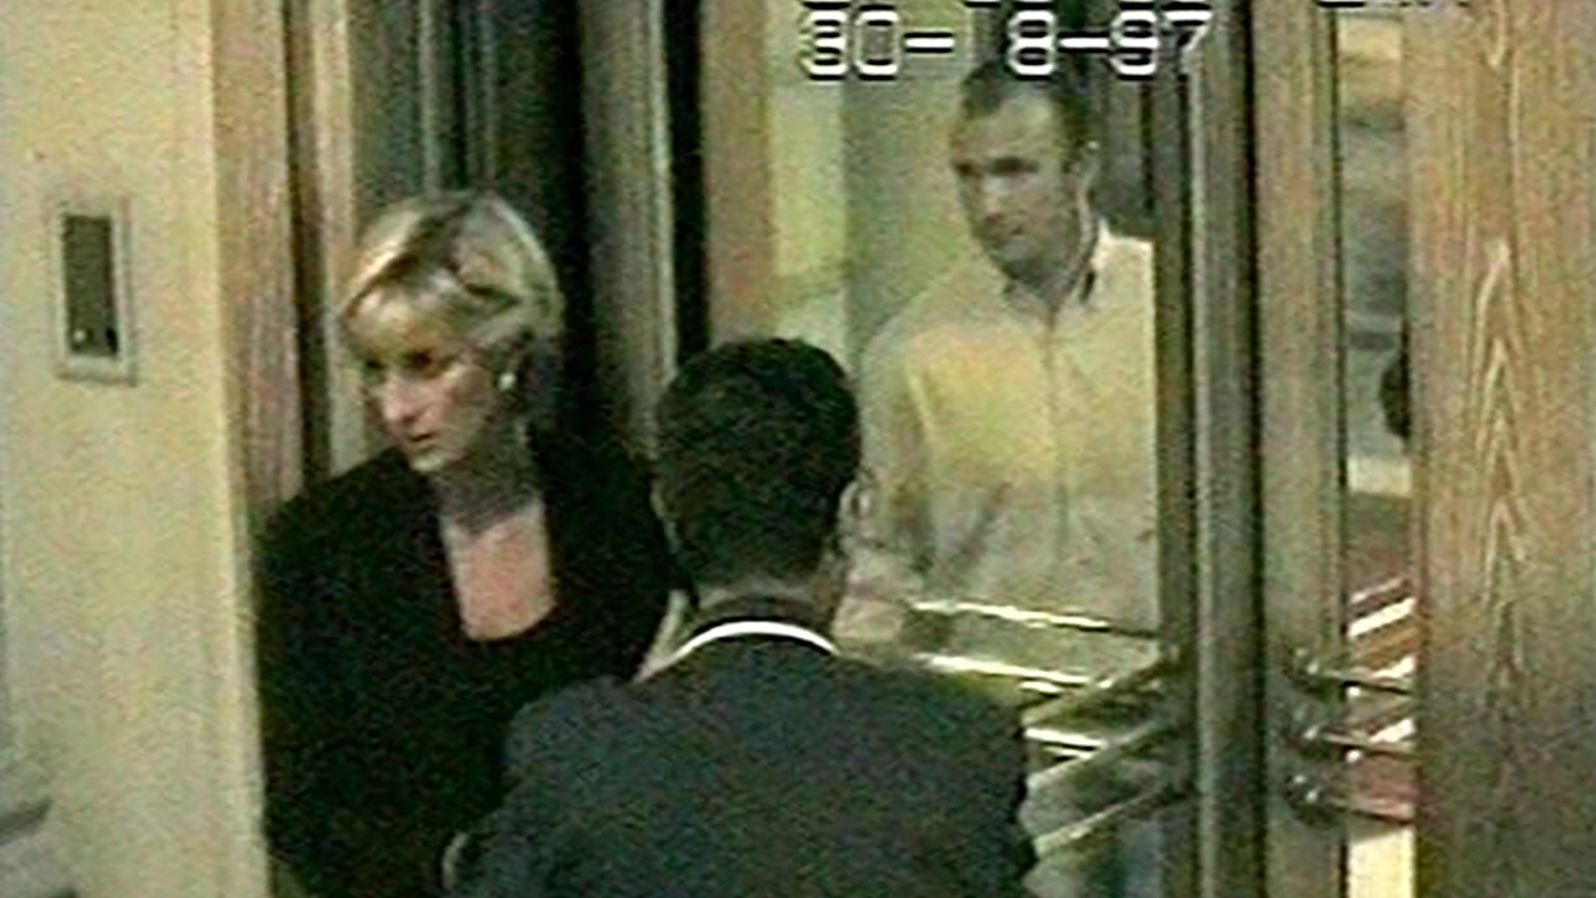 This photo, taken from surveillance video, shows Diana arriving at the Ritz Hotel in Paris on August 30, 1997. It is one of the last photos of her alive. 